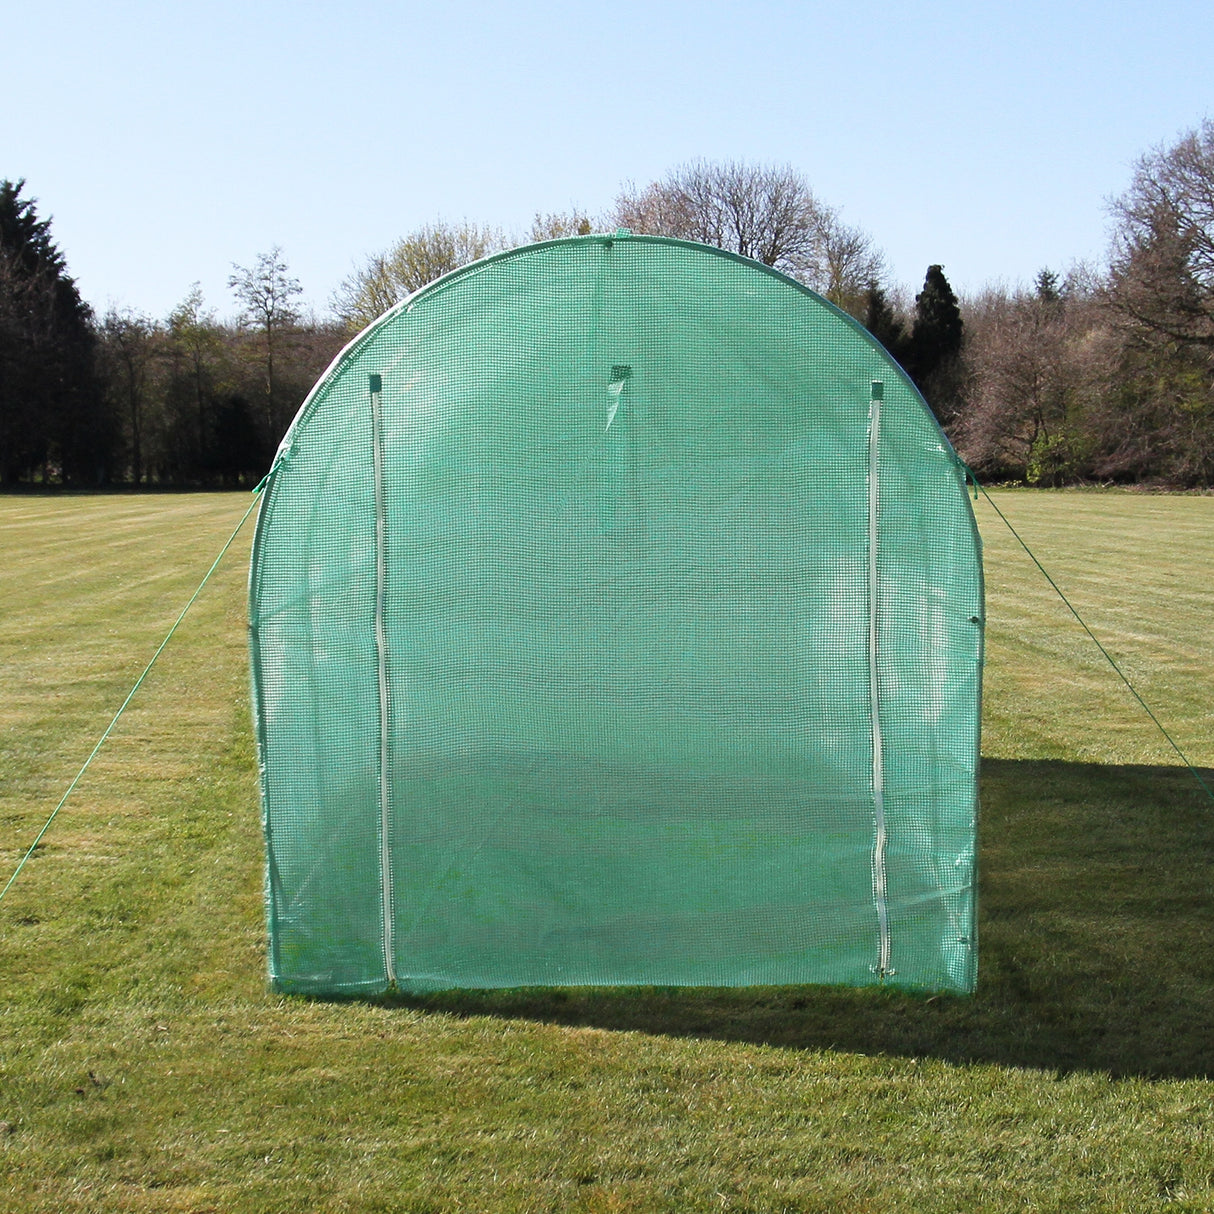 Polytunnel 19mm 4m x 2m with Racking